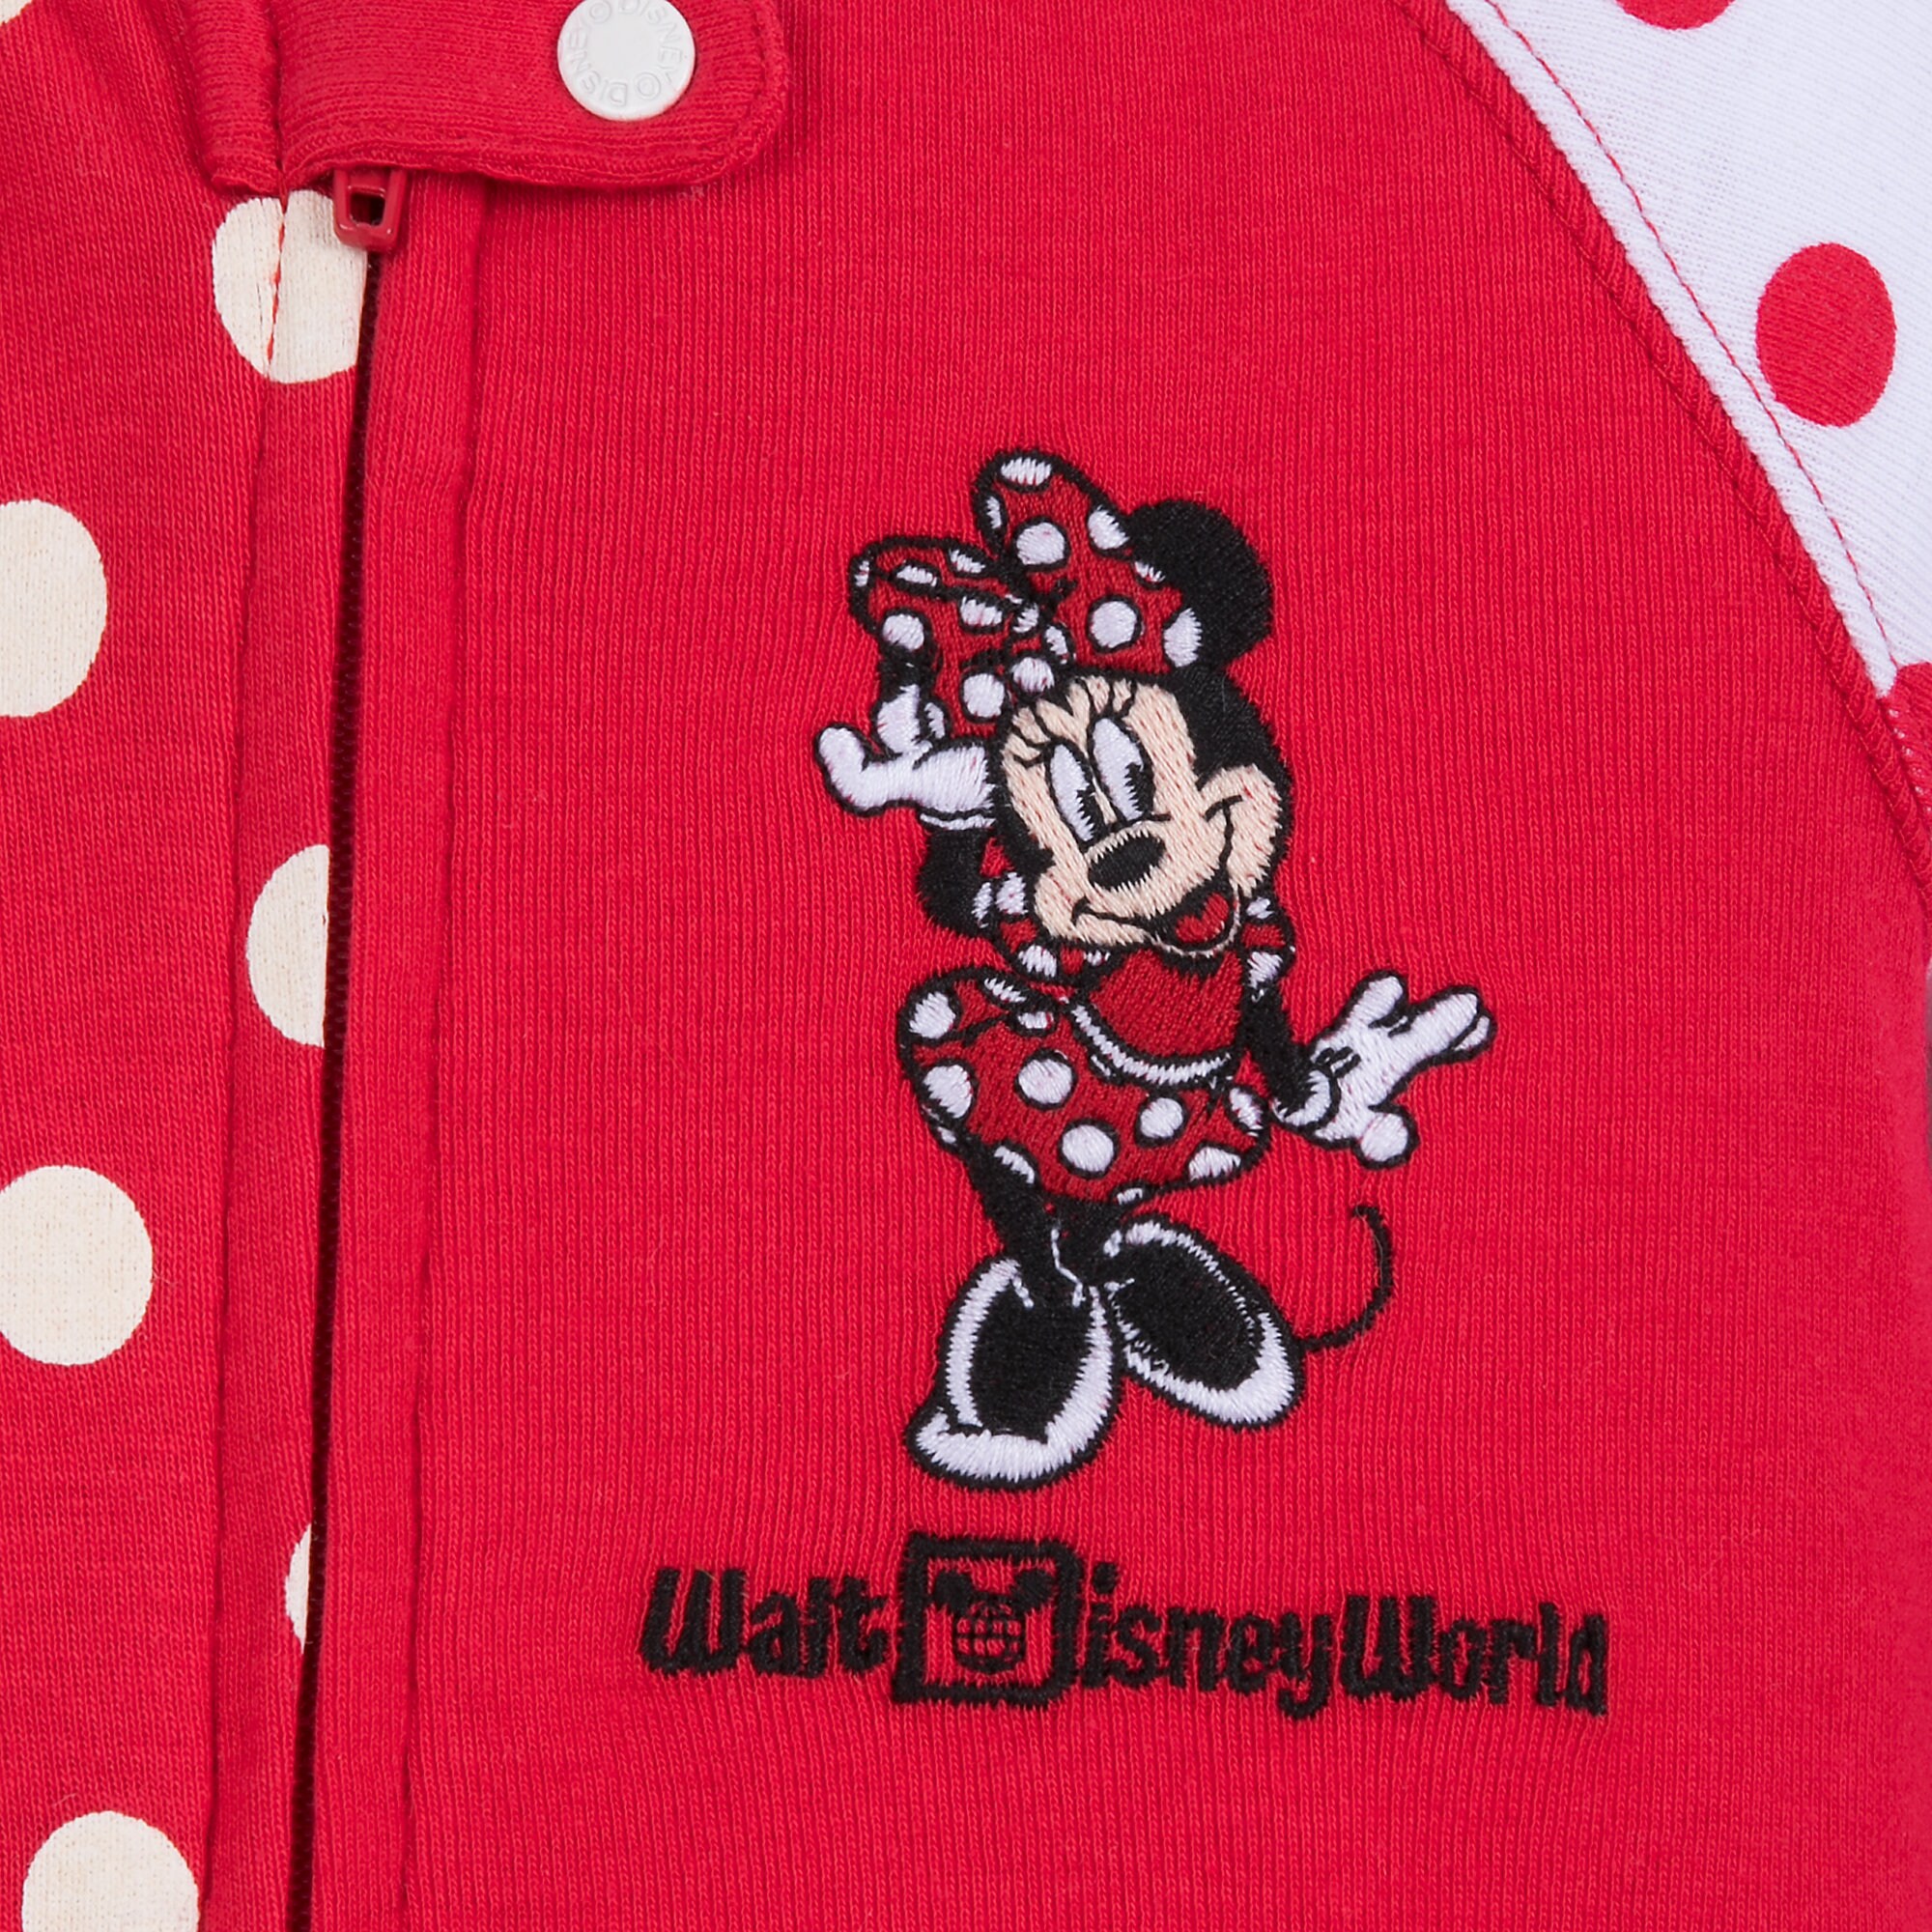 Minnie Mouse Coverall for Baby - Walt Disney World